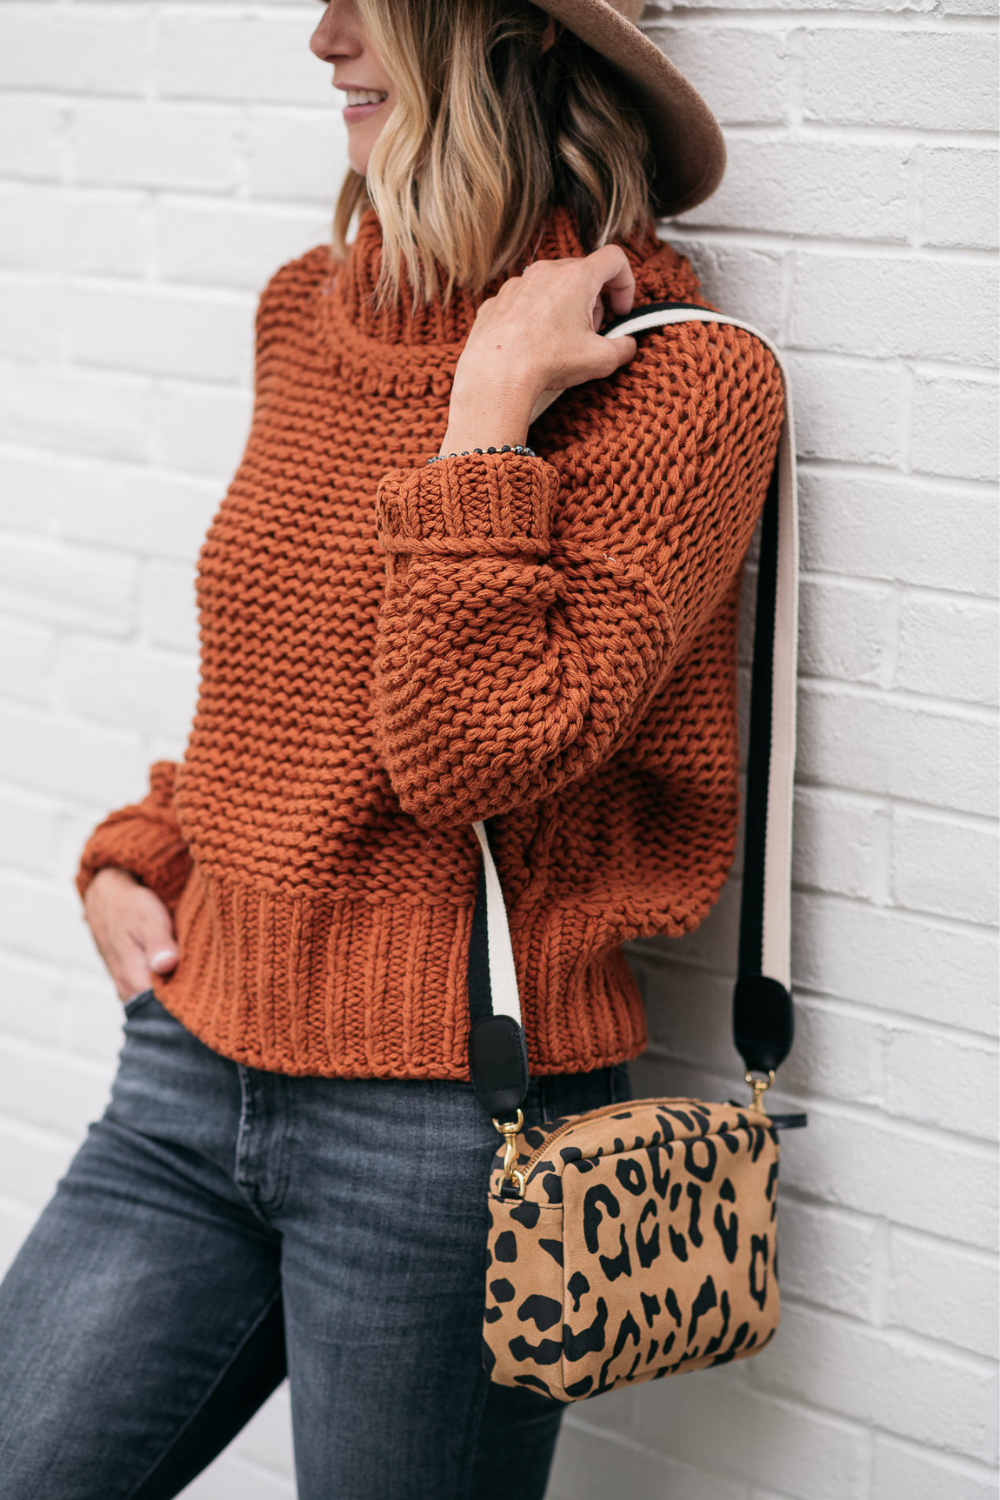 Thanksgiving outfit ideas: Suzanne wearing an orange sweater, denim, and leopard crossbody